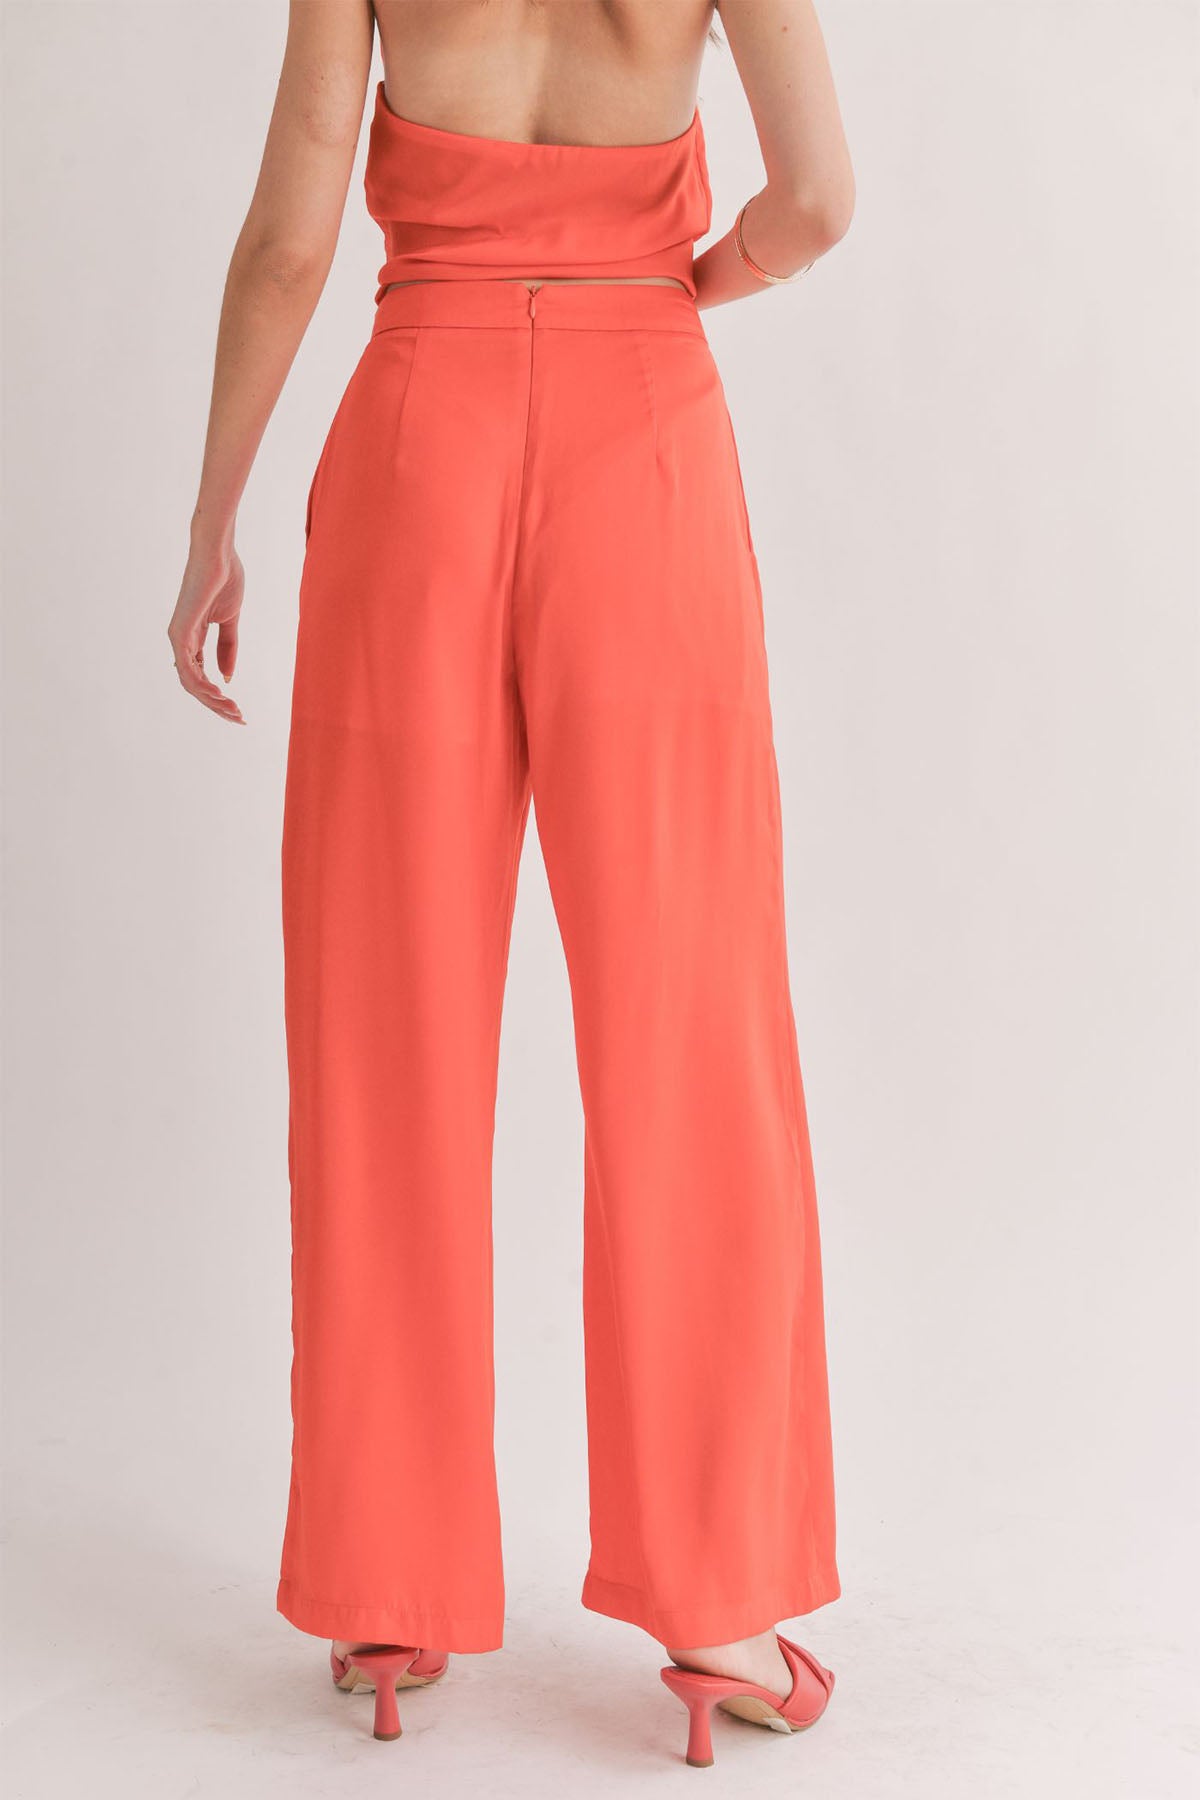 Sage the Label - Dream Skies Wide Leg Pant - Red - Back